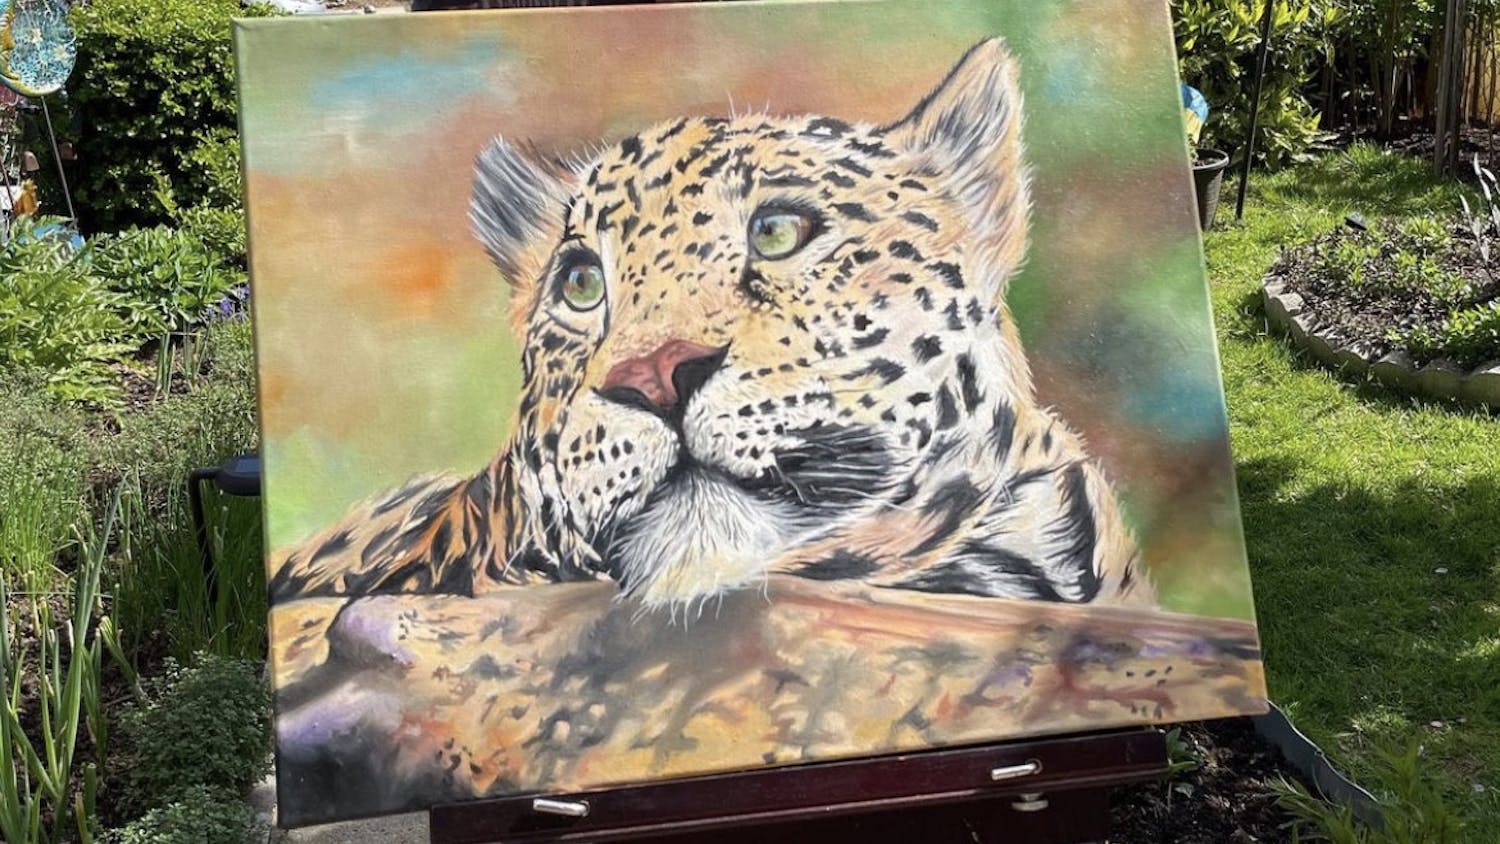 I'm Ivanna Dudych, a senior at Mast Community Charter School and this is my oil painting of leopard I created for my mother. I made this painting to experiment with different colors and brush stroke techniques to get the realistic feel of the painting.&nbsp;